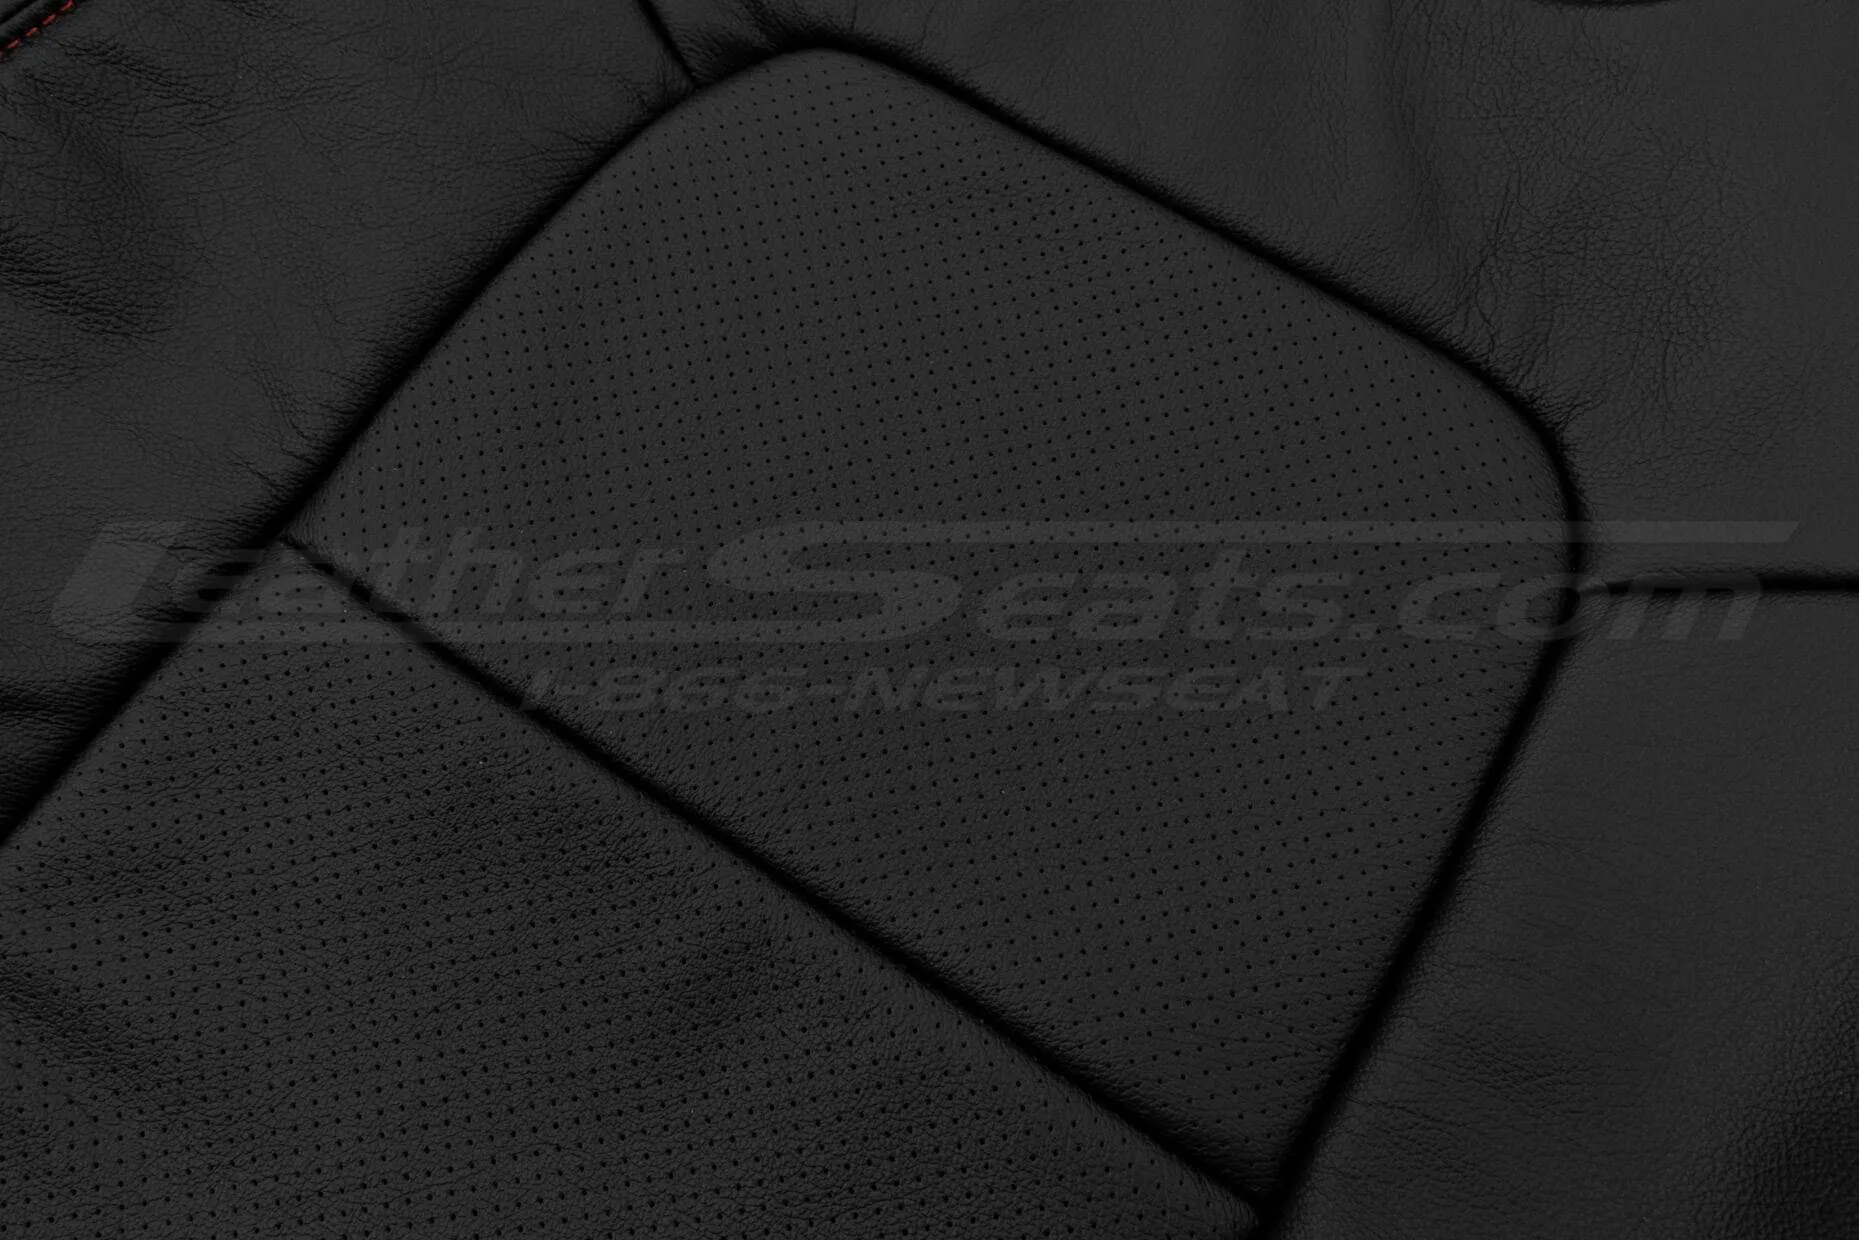 Backrest upholstery leather texture and perforation close-up